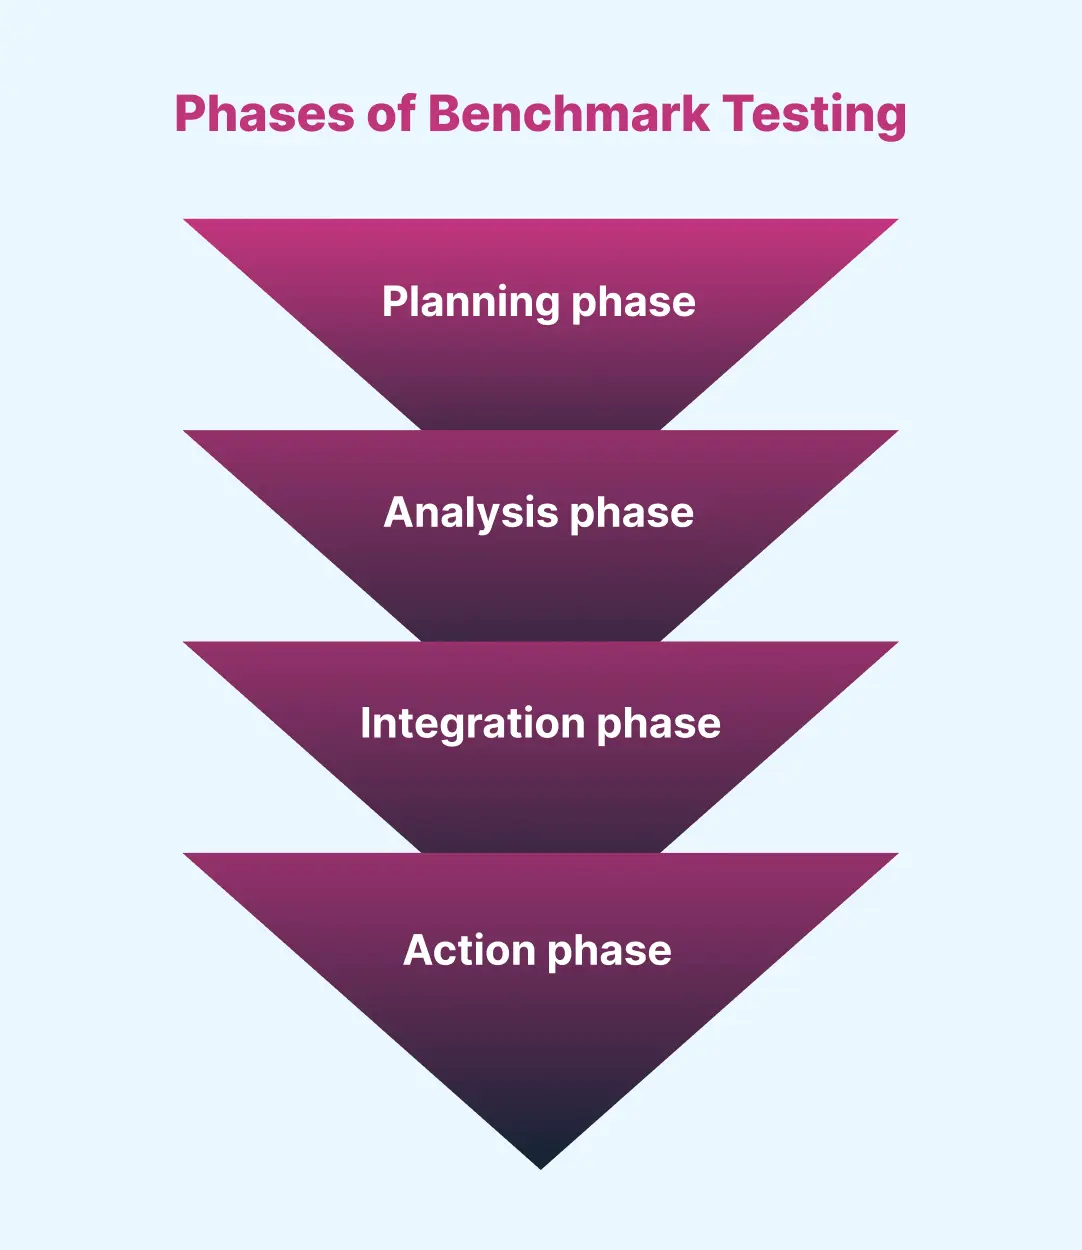 Phases of Benchmark Testing